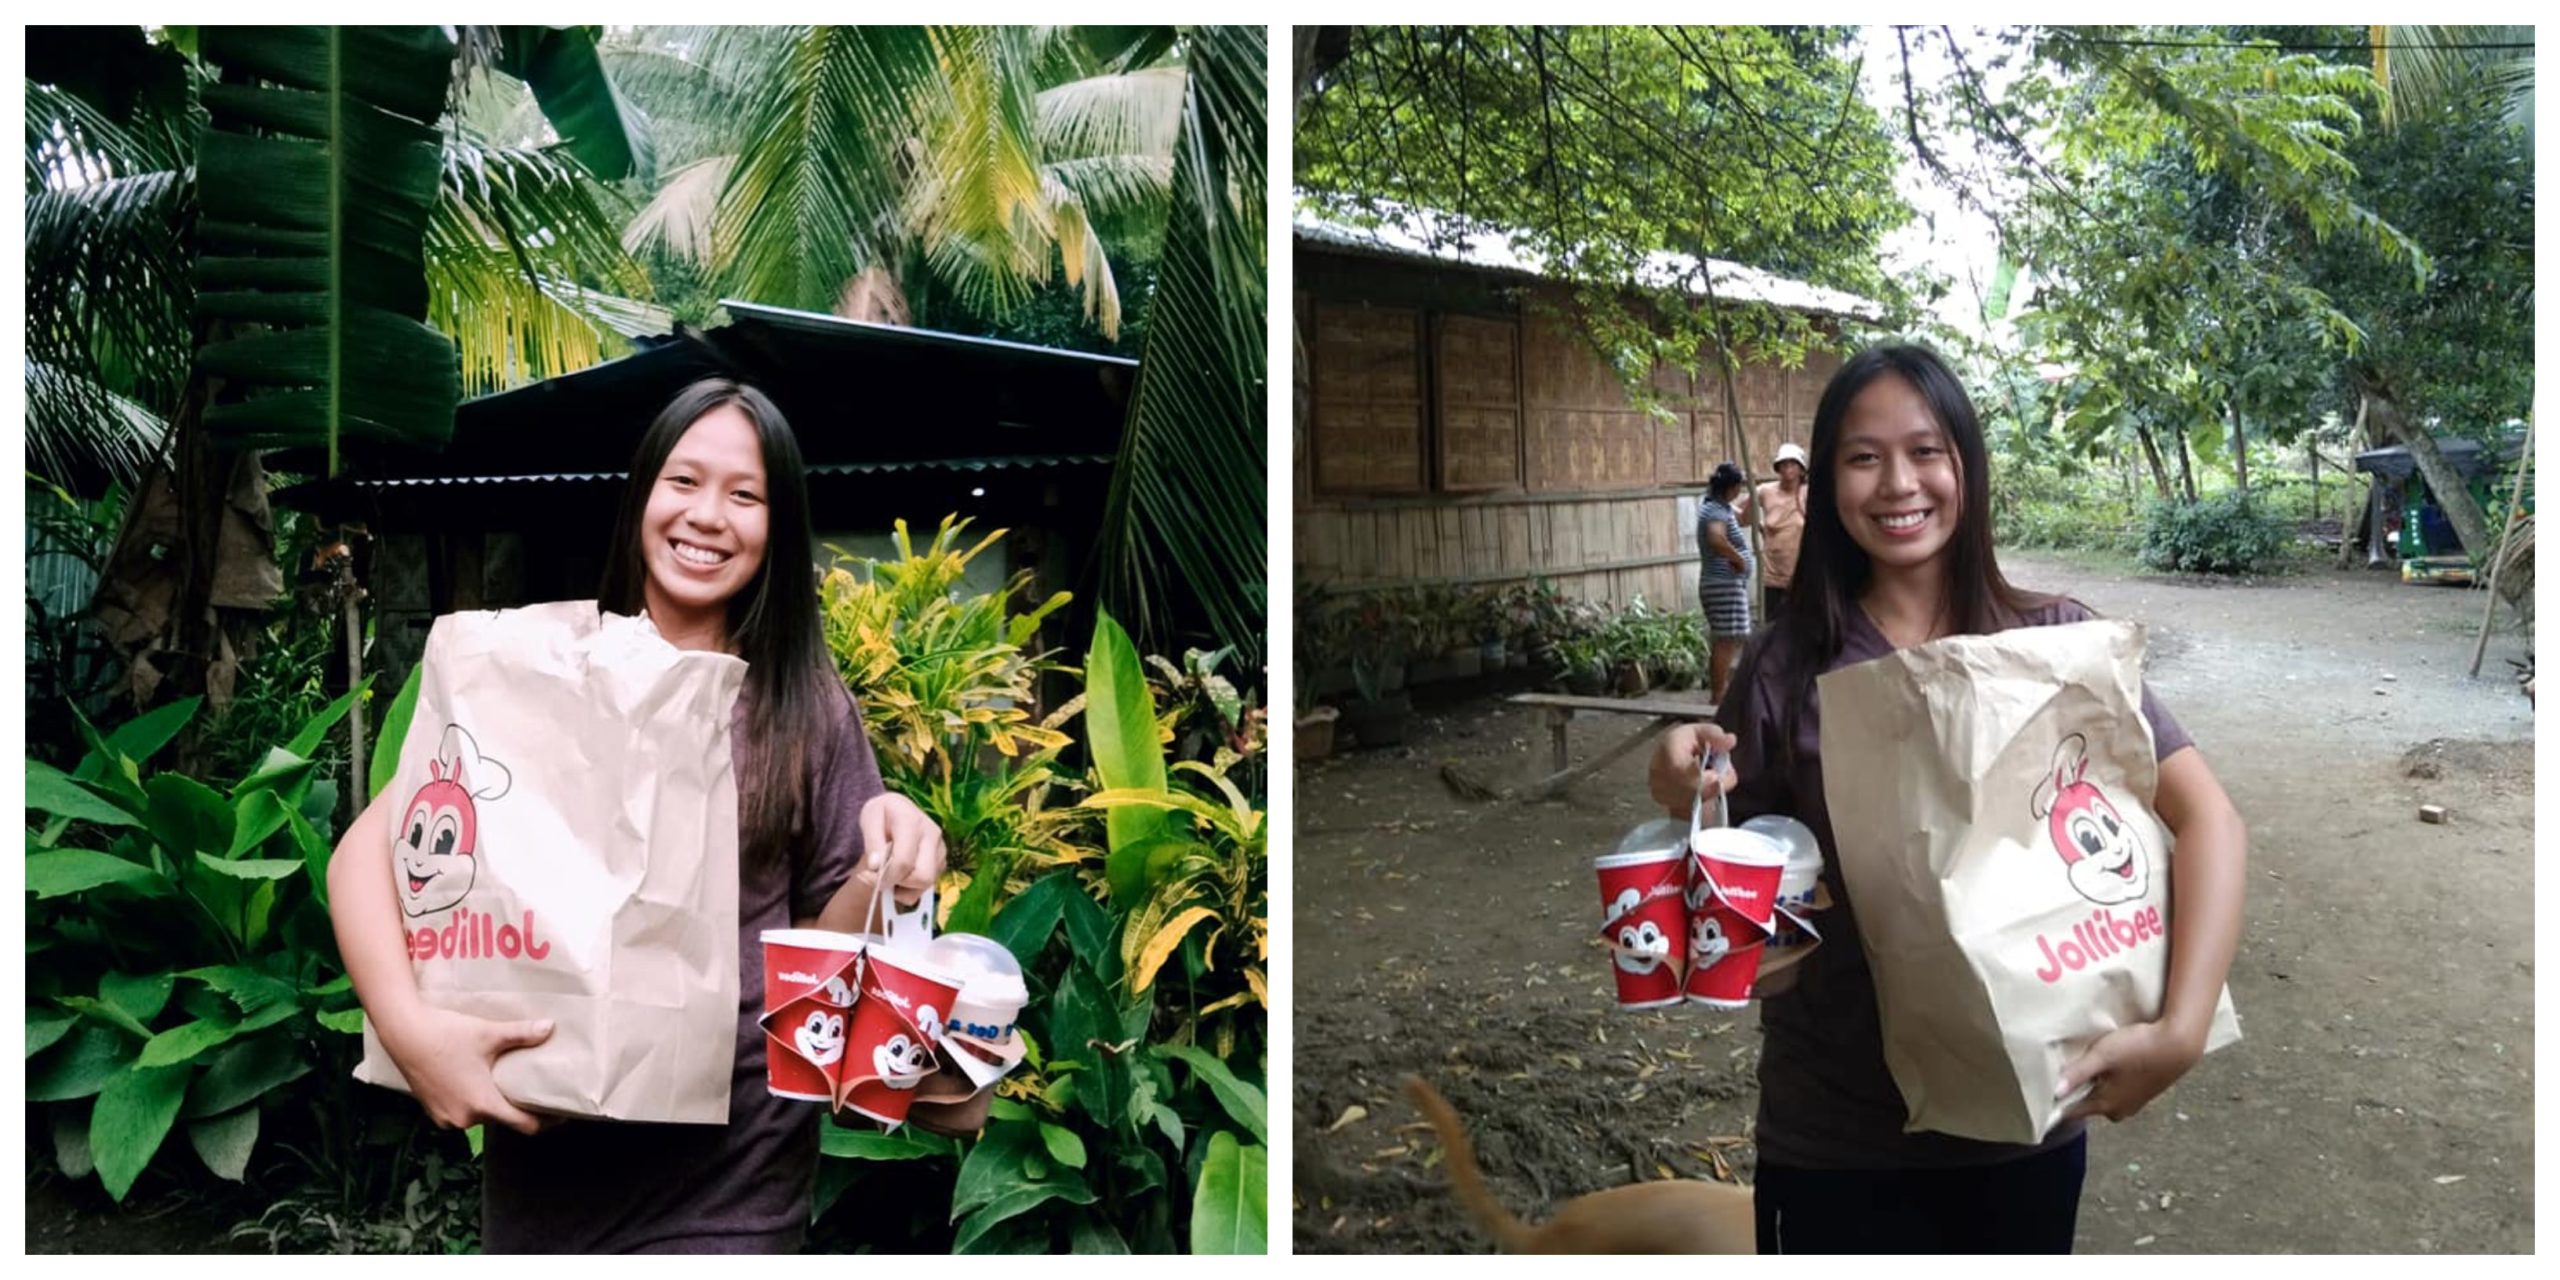 Rosemarie Jose shows off the surprise that she got from her boyfriend. Photo: Jose/FB